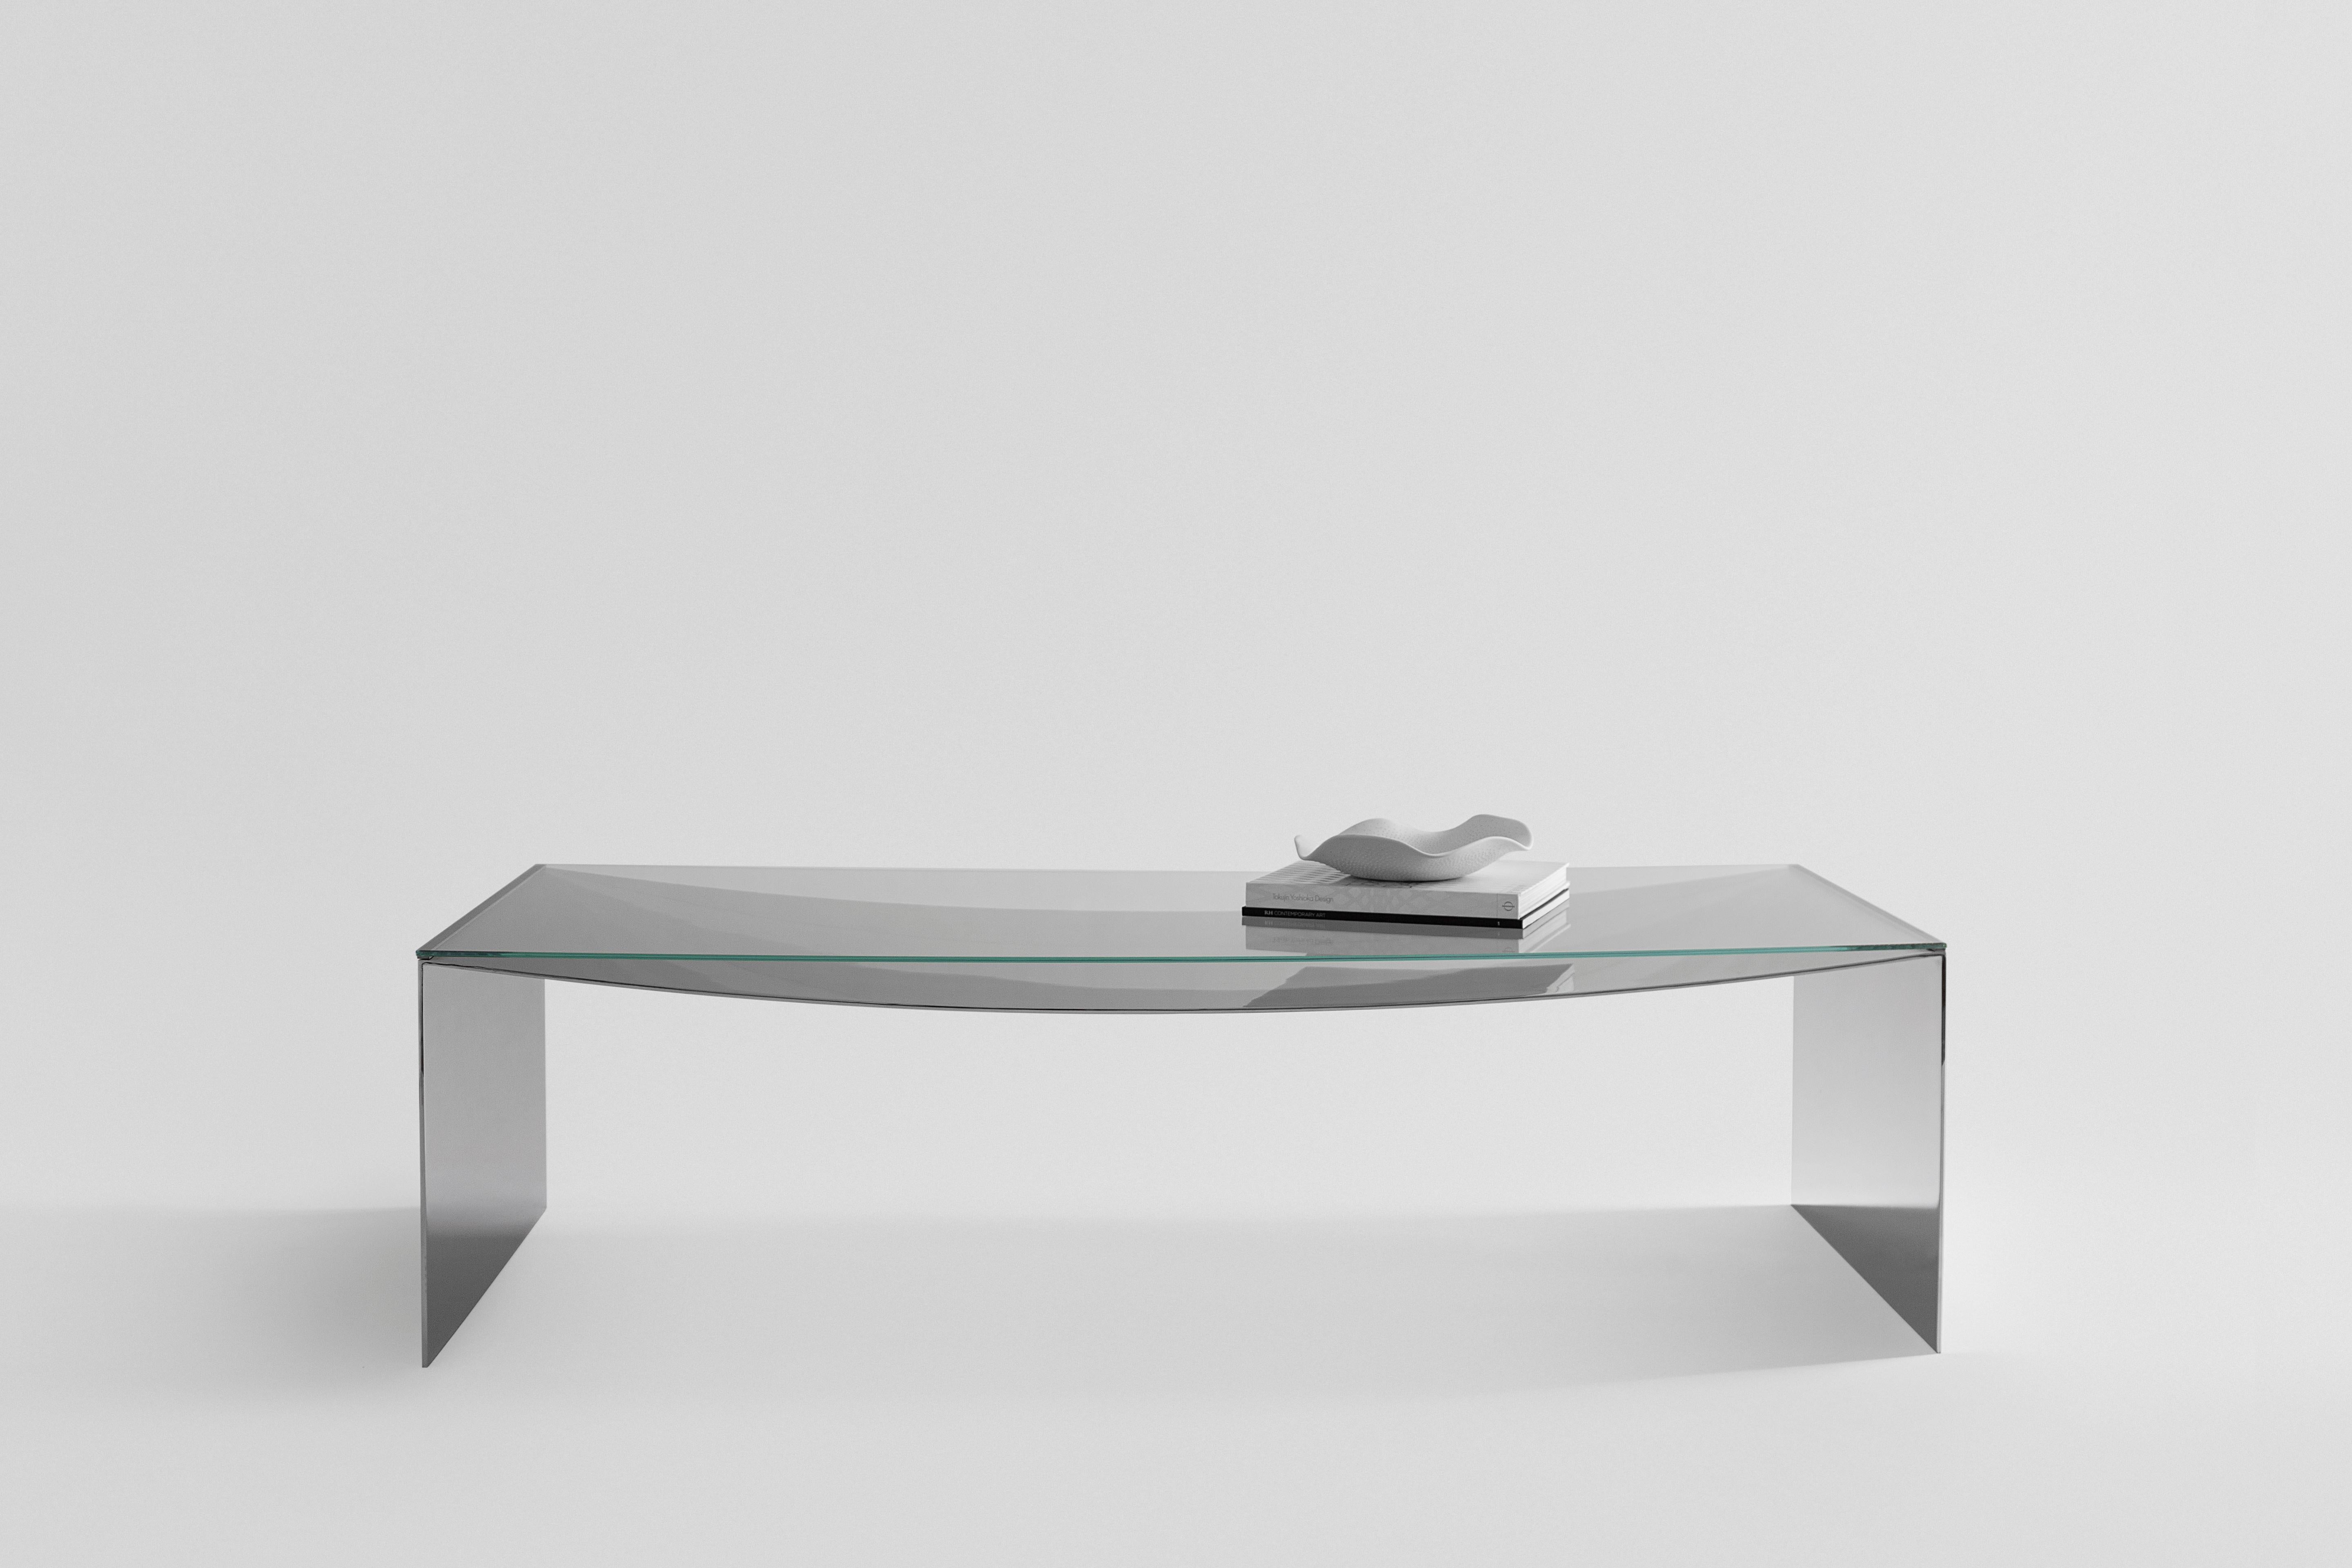 A subtle line curved by the effect of gravity and the same weight of the material that starts at one end and ends, in the same way, is the prime of this table. 

The physical properties of the material used and its finishes make Deflect cause